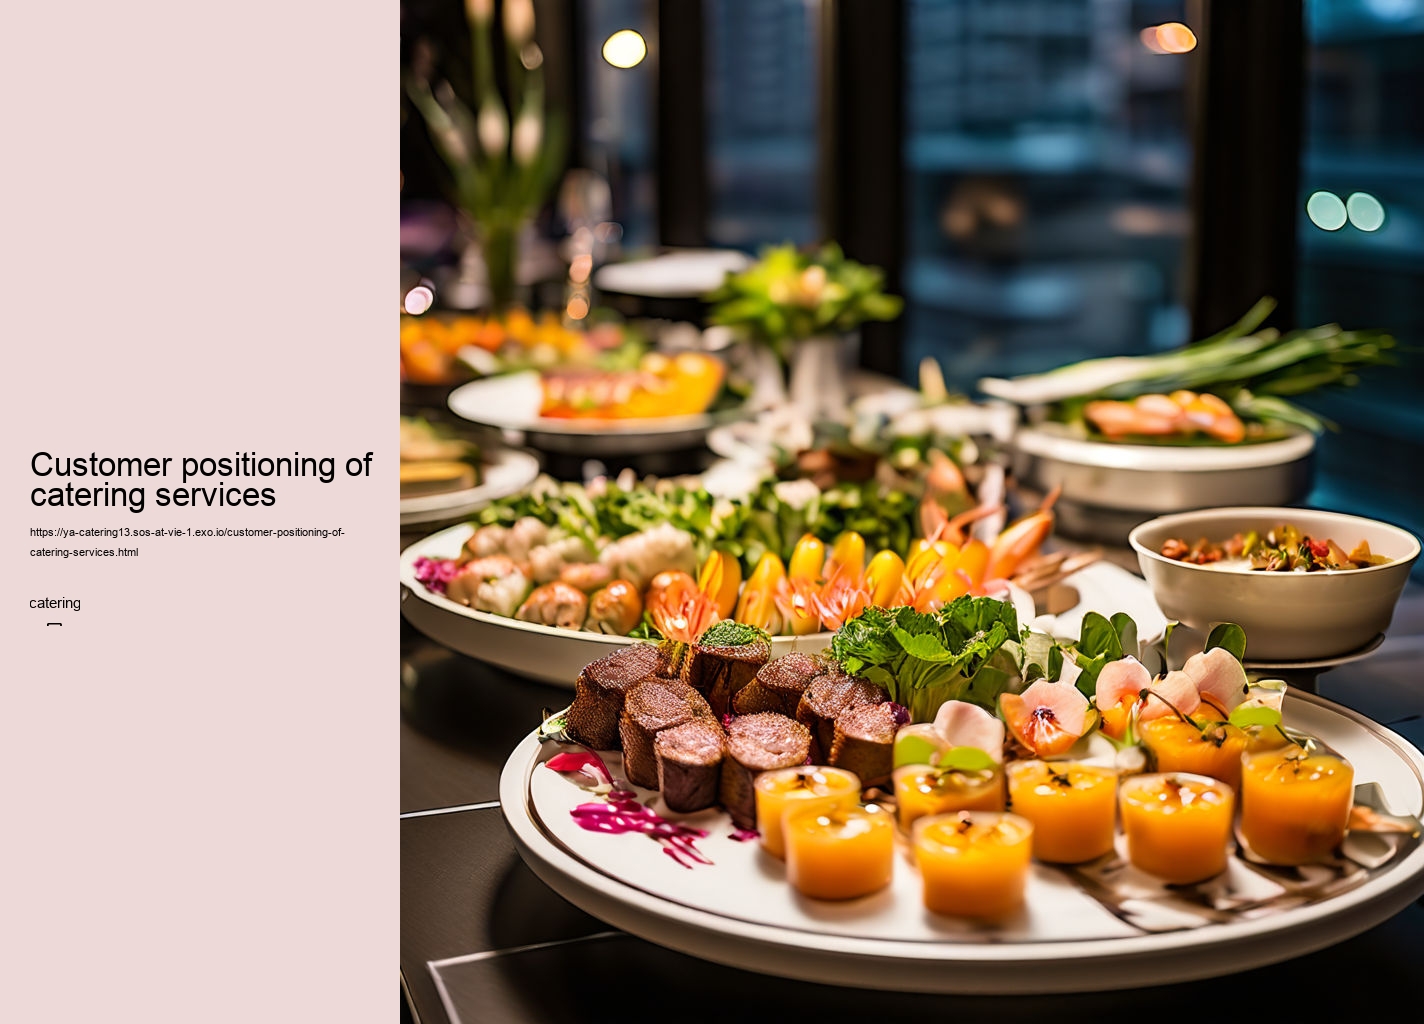 Customer positioning of catering services